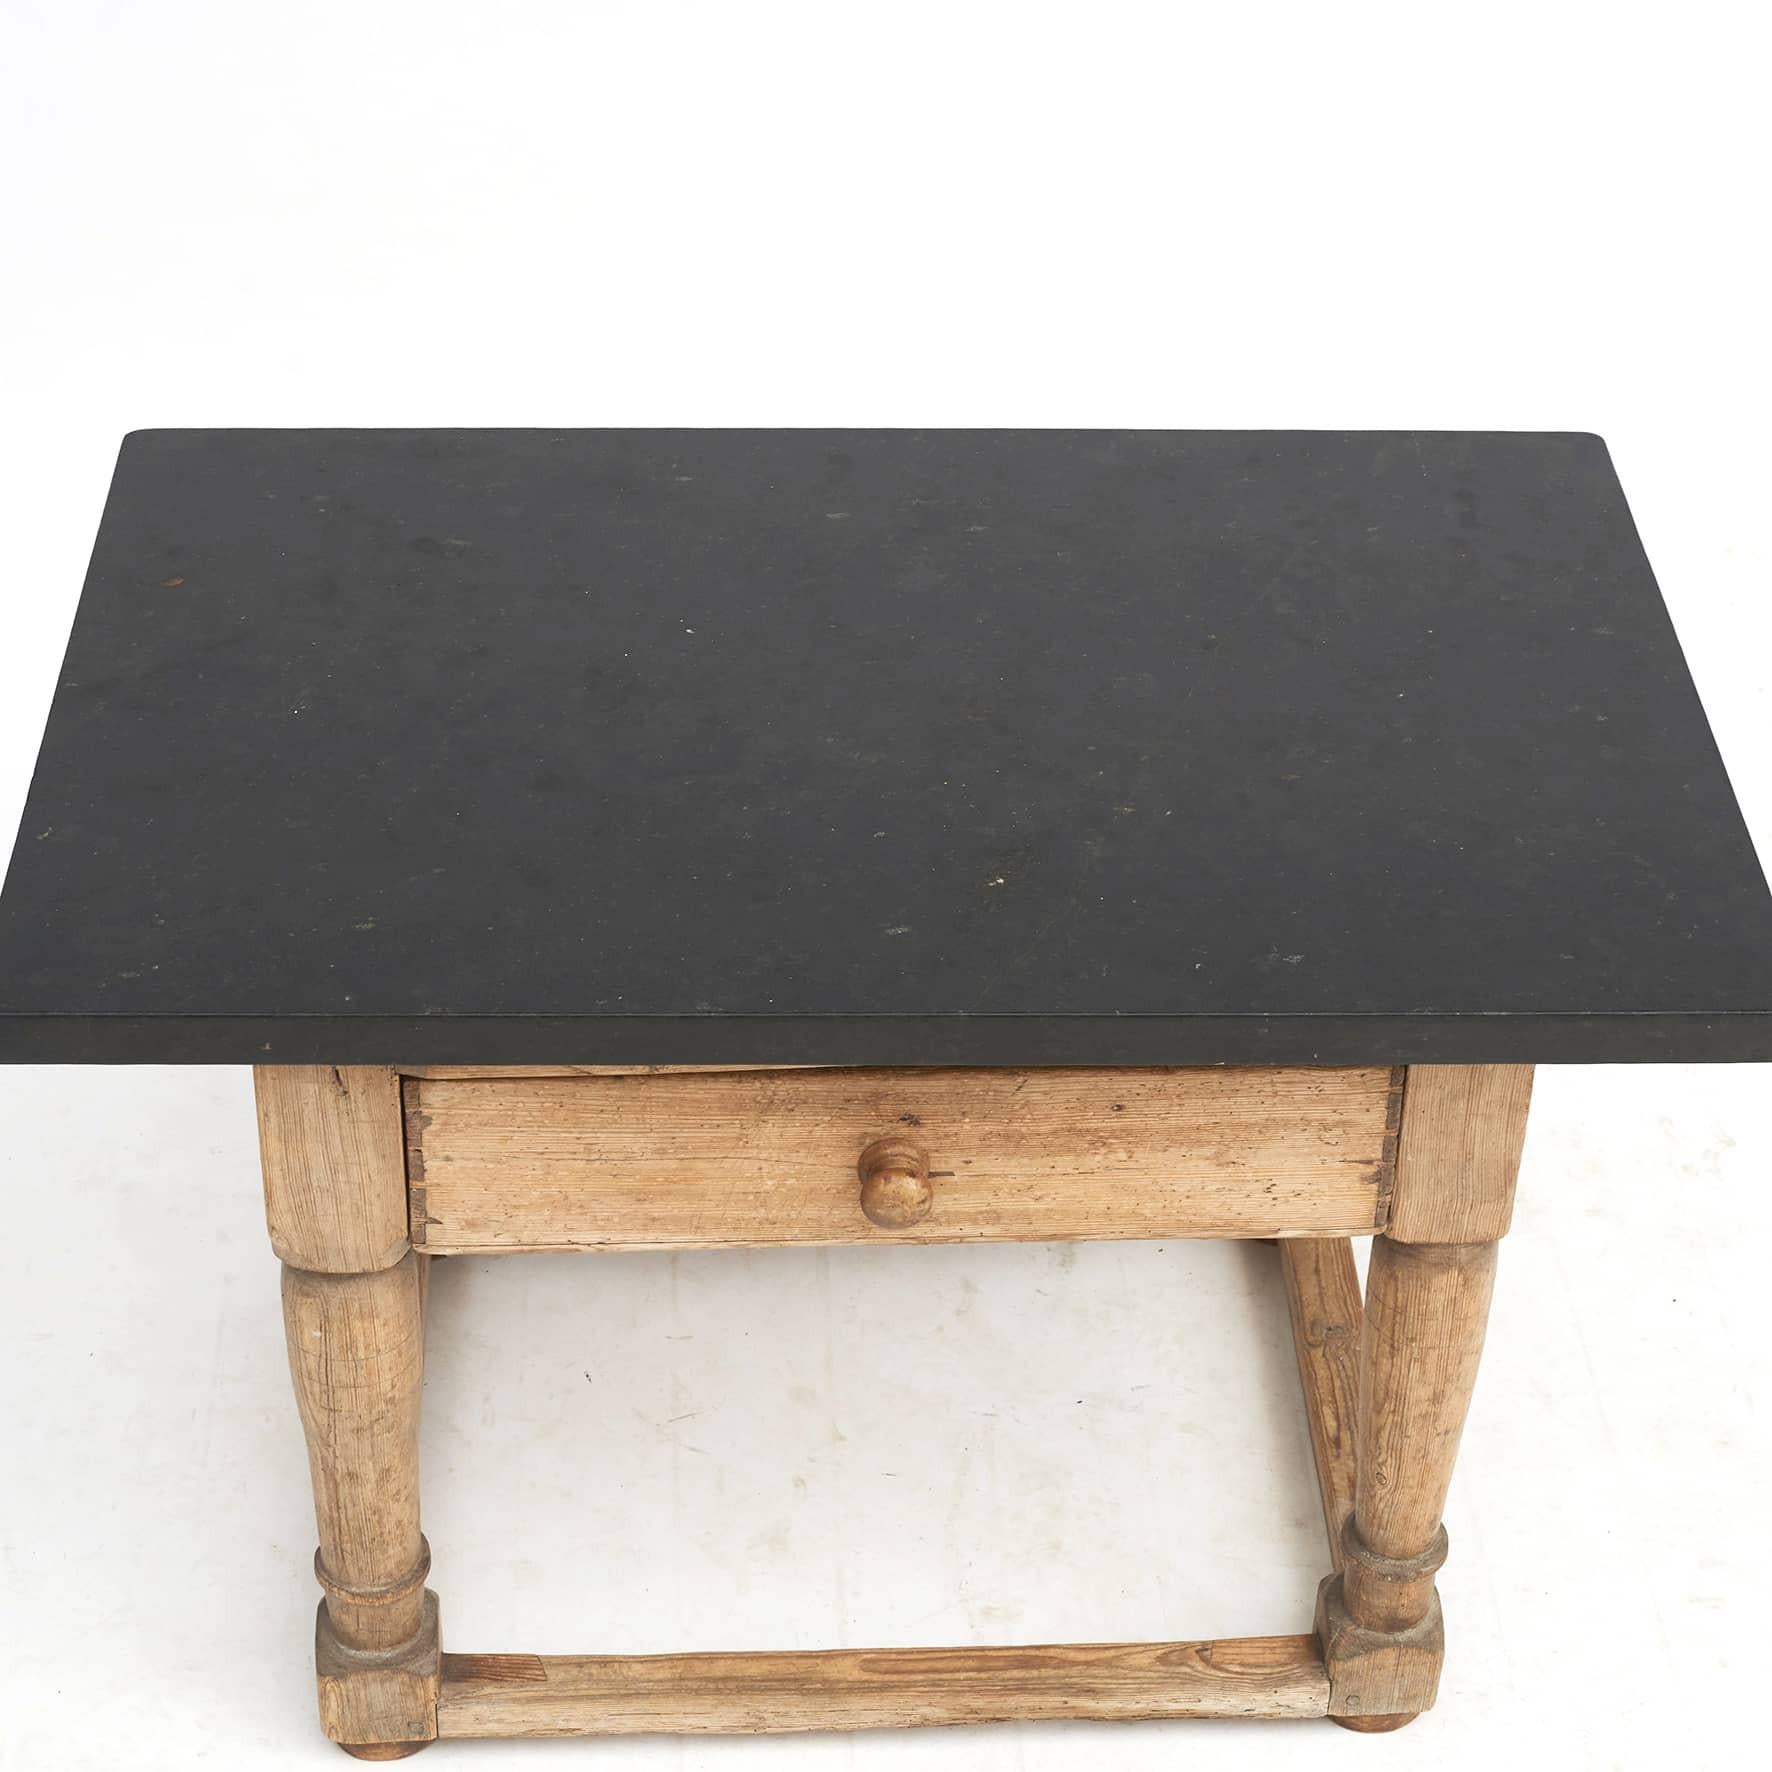 Antique Swedish Baroque Table With Black Jämtland Limestone Top In Good Condition For Sale In Kastrup, DK